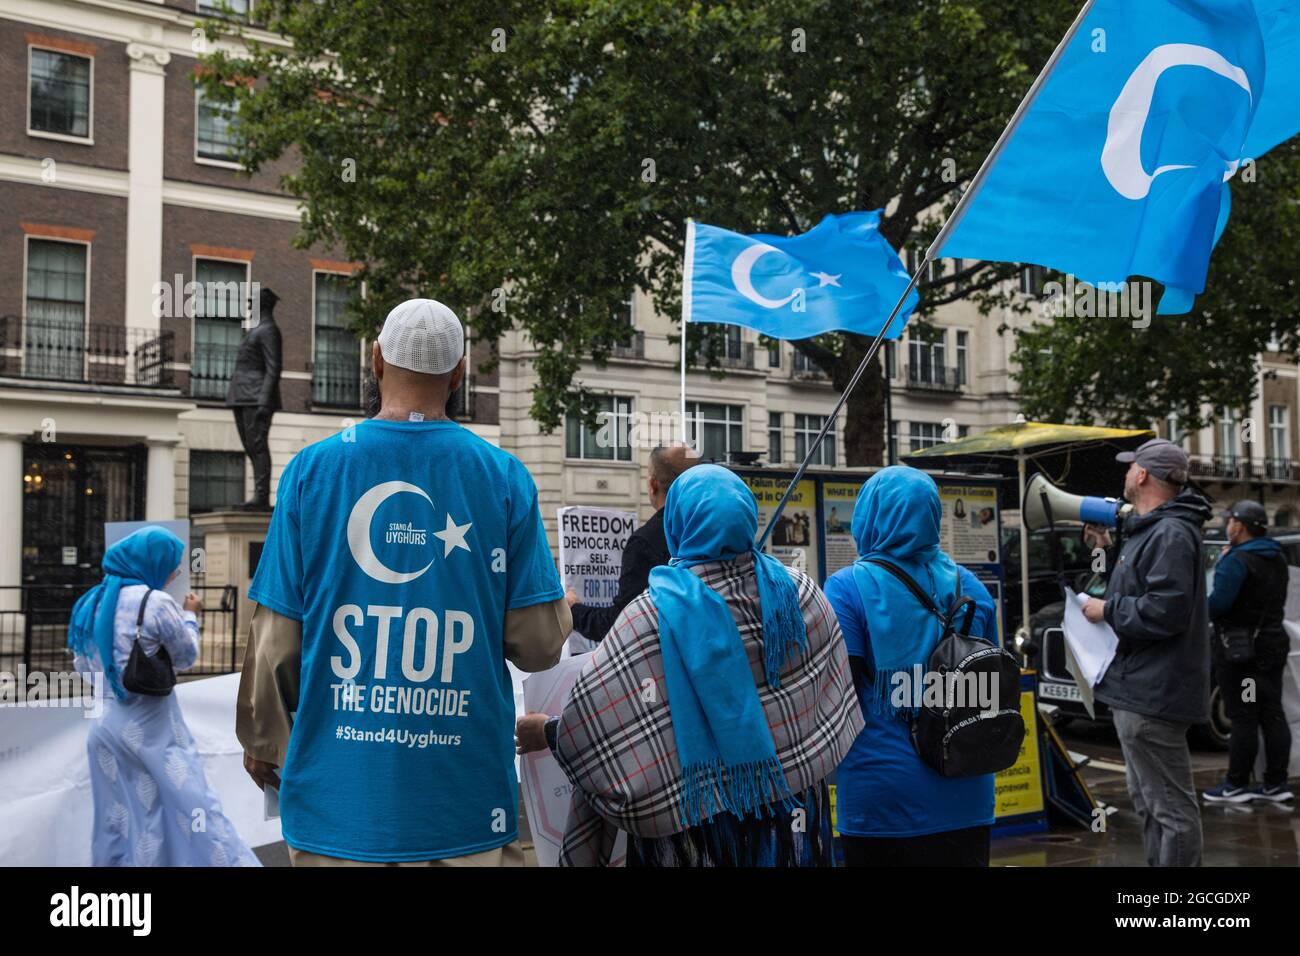 London, UK. 5th August, 2021. Members of the Uyghur community join activists from Uyghur Solidarity Campaign UK and other supporting groups protesting opposite the Chinese embassy in support of the Uyghur people’s struggle for freedom. Activists highlighted the Chinese government's persecution and forced assimilation of Uyghurs, Kazakhs and other indigenous people in East Turkestan and Xinjiang and called for them to have the right to determine their own futures through a democratic process. Credit: Mark Kerrison/Alamy Live News Stock Photo